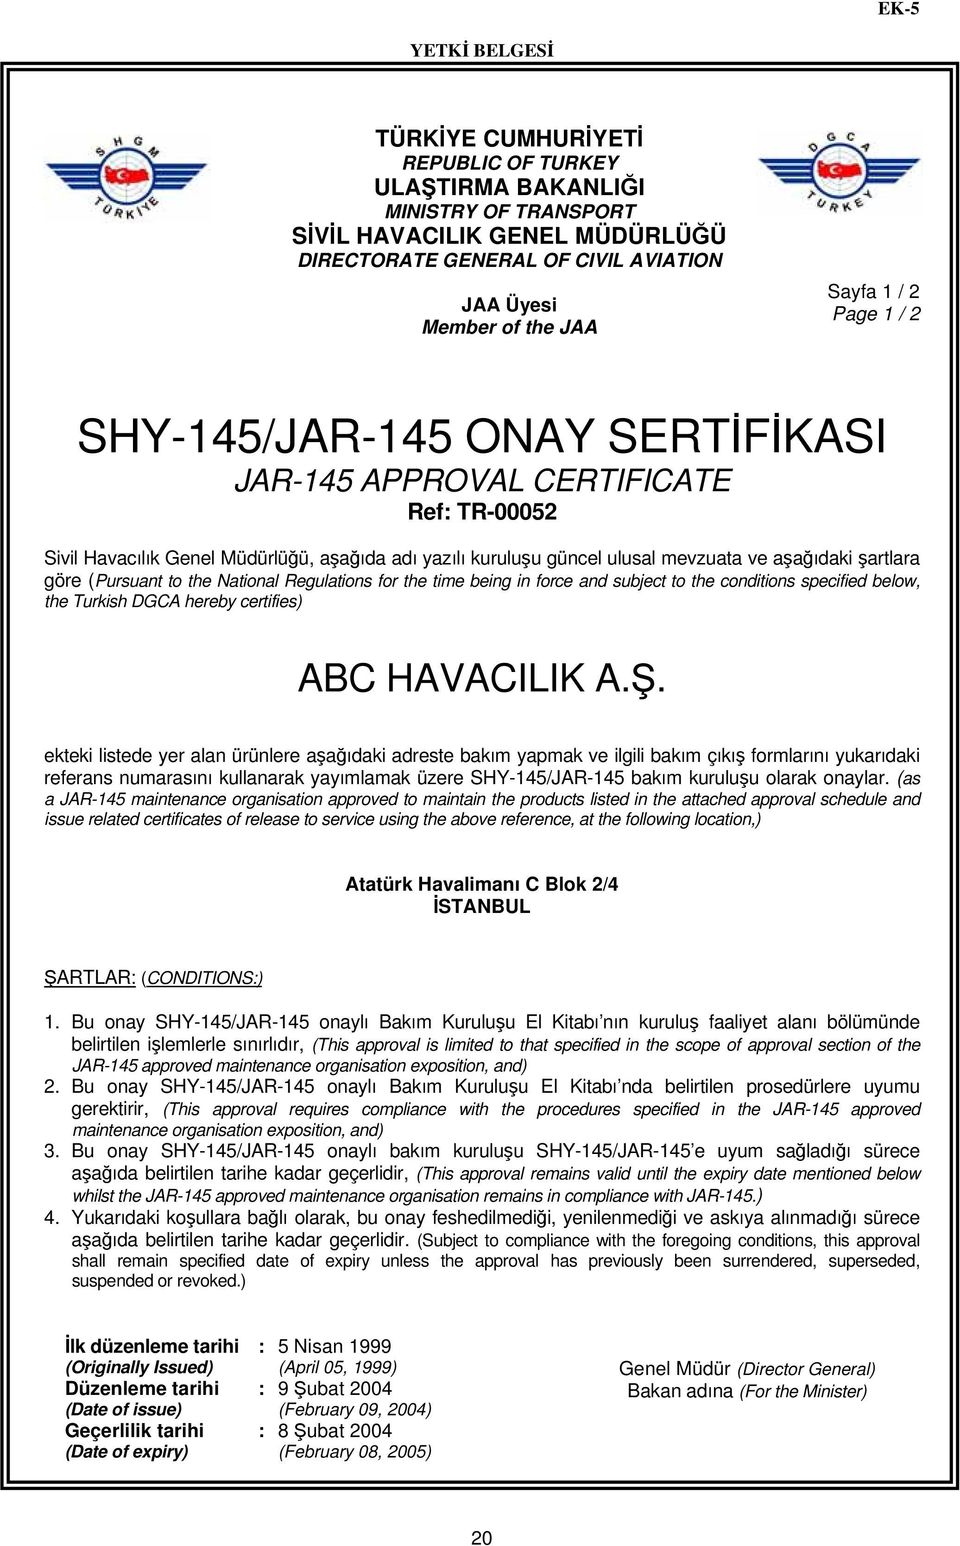 şartlara göre (Pursuant to the National Regulations for the time being in force and subject to the conditions specified below, the Turkish DGCA hereby certifies) ABC HAVACILIK A.Ş.